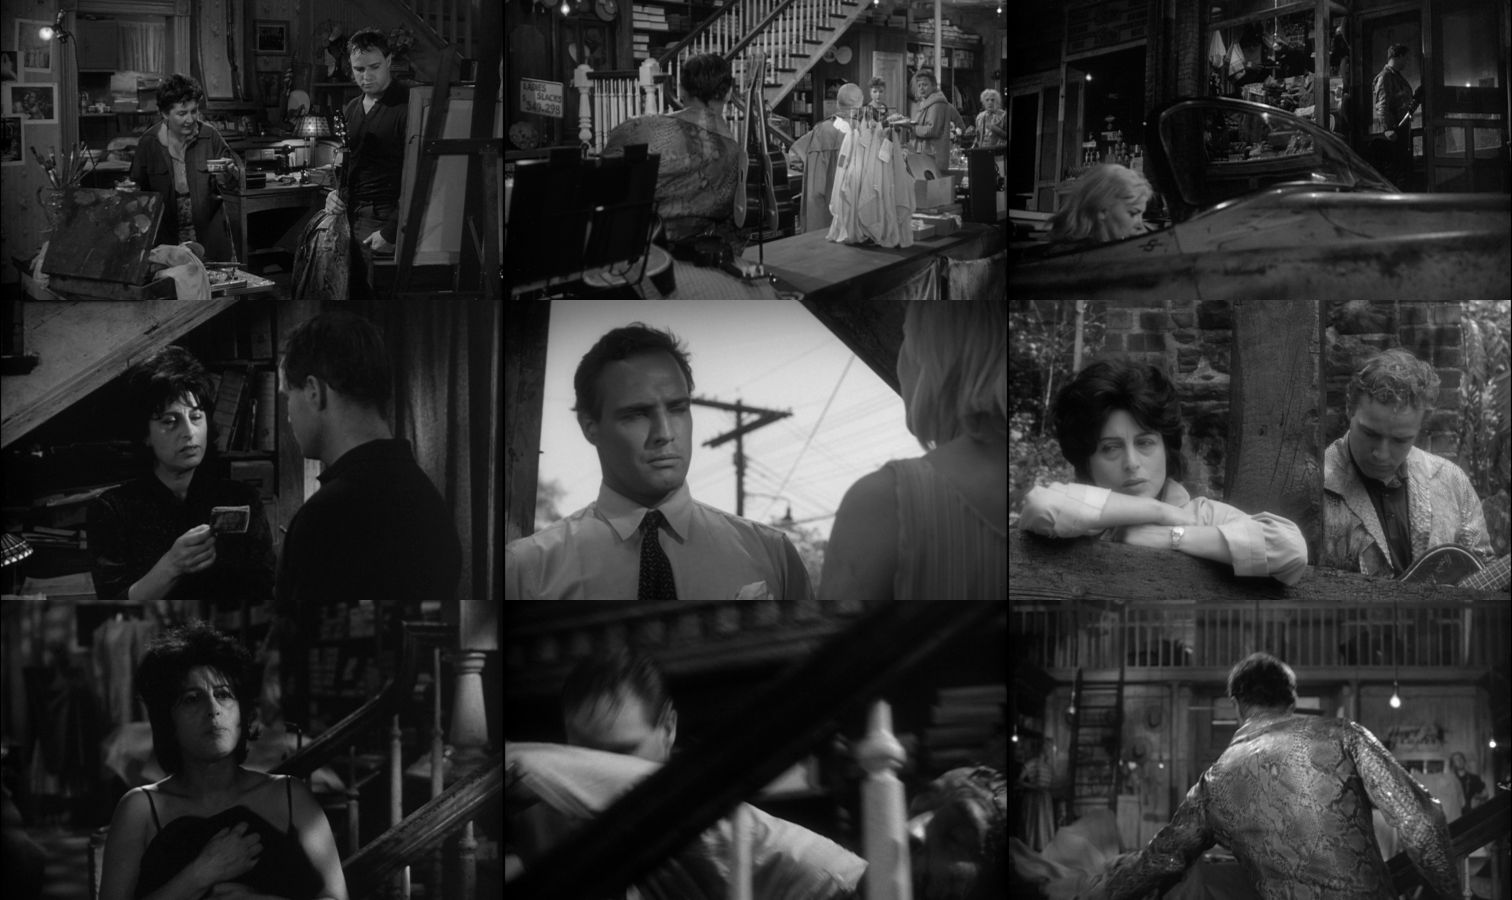 / The.Fugitive.Kind.1960.1080p.BluRay.X264-AMIABLE 12.04GB-2.png